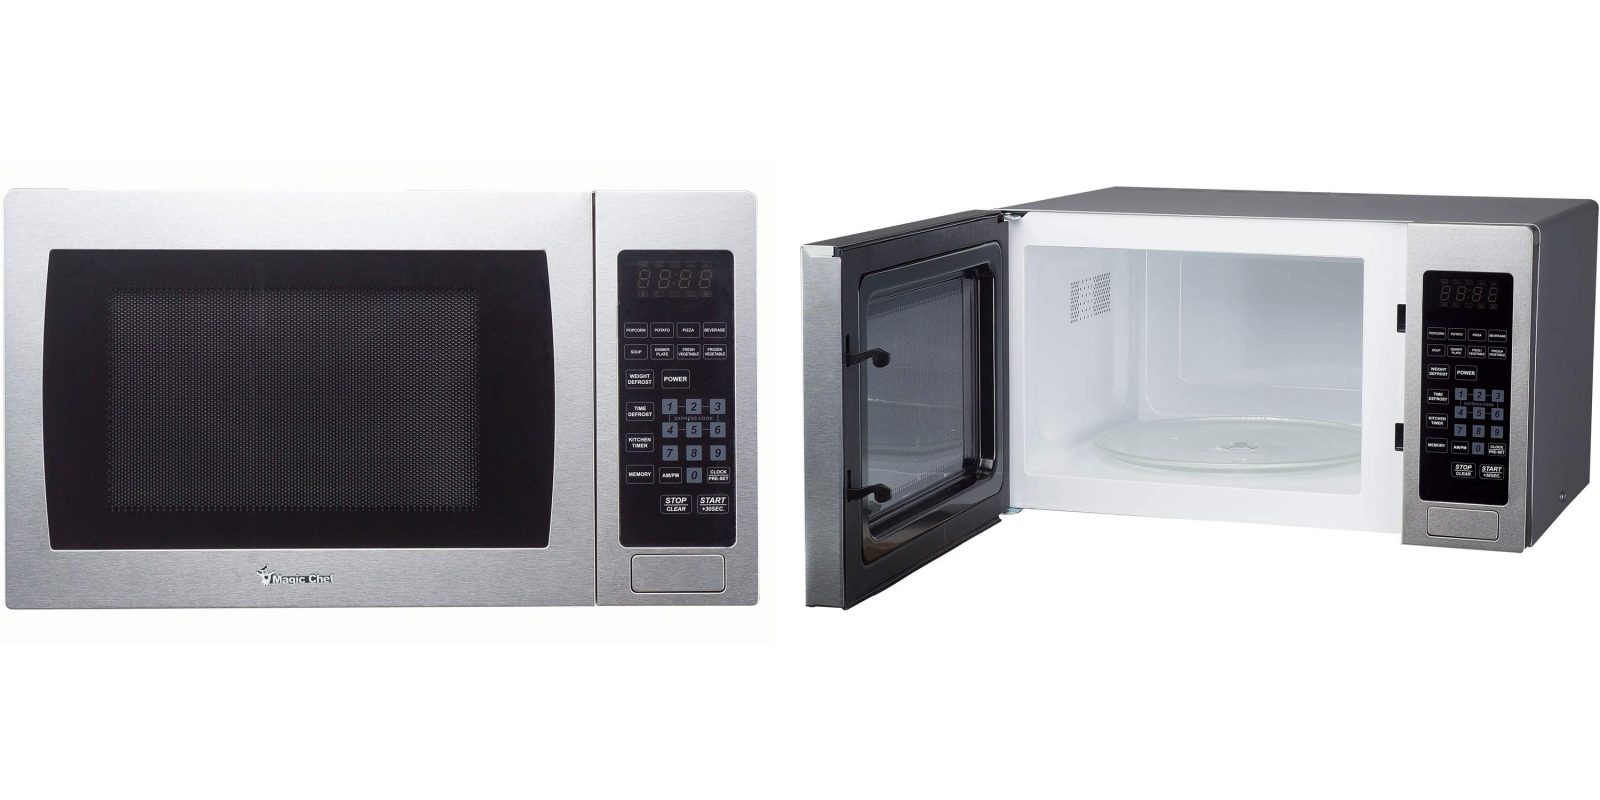 Pick up this Magic Chef Microwave for your dorm room at $58.50 (Reg